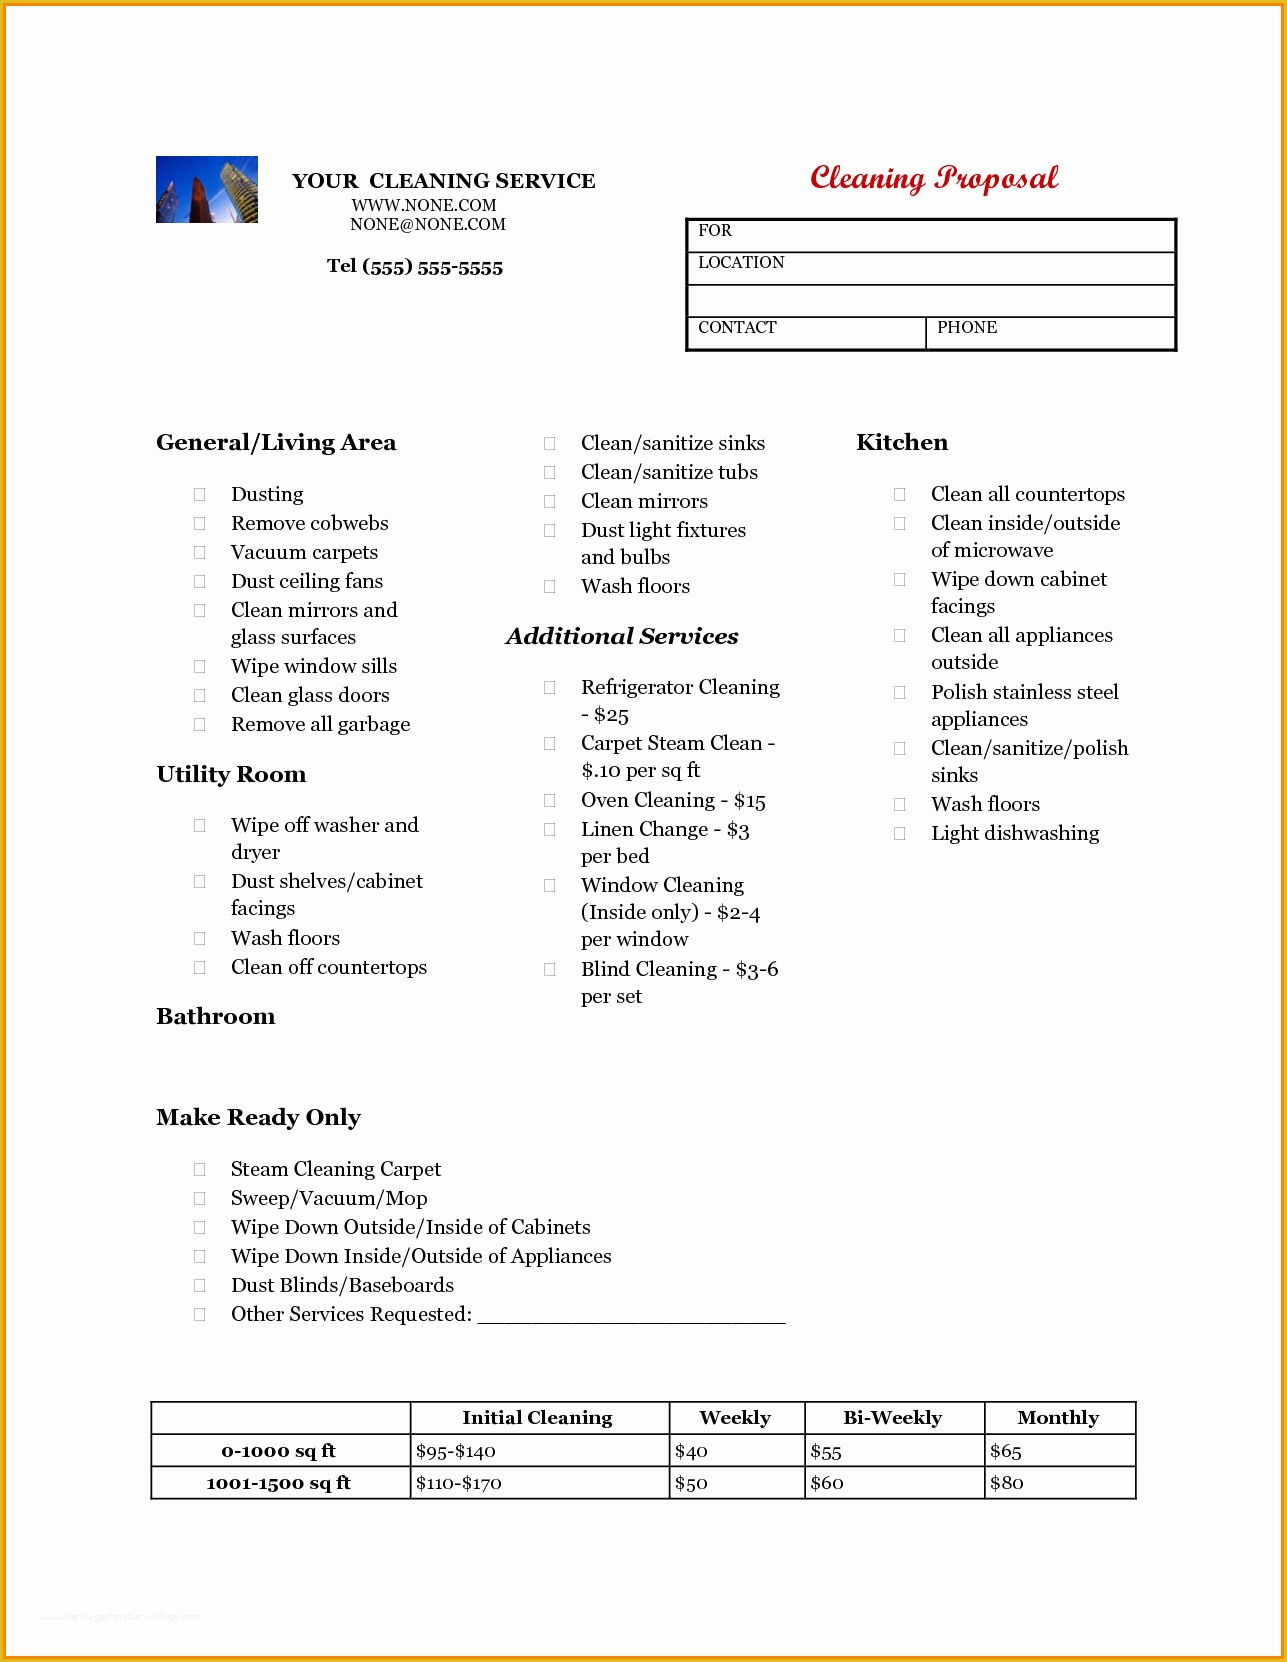 Cleaning Service Proposal Template Free Of Cleaning Services Proposal Letter Design Templates